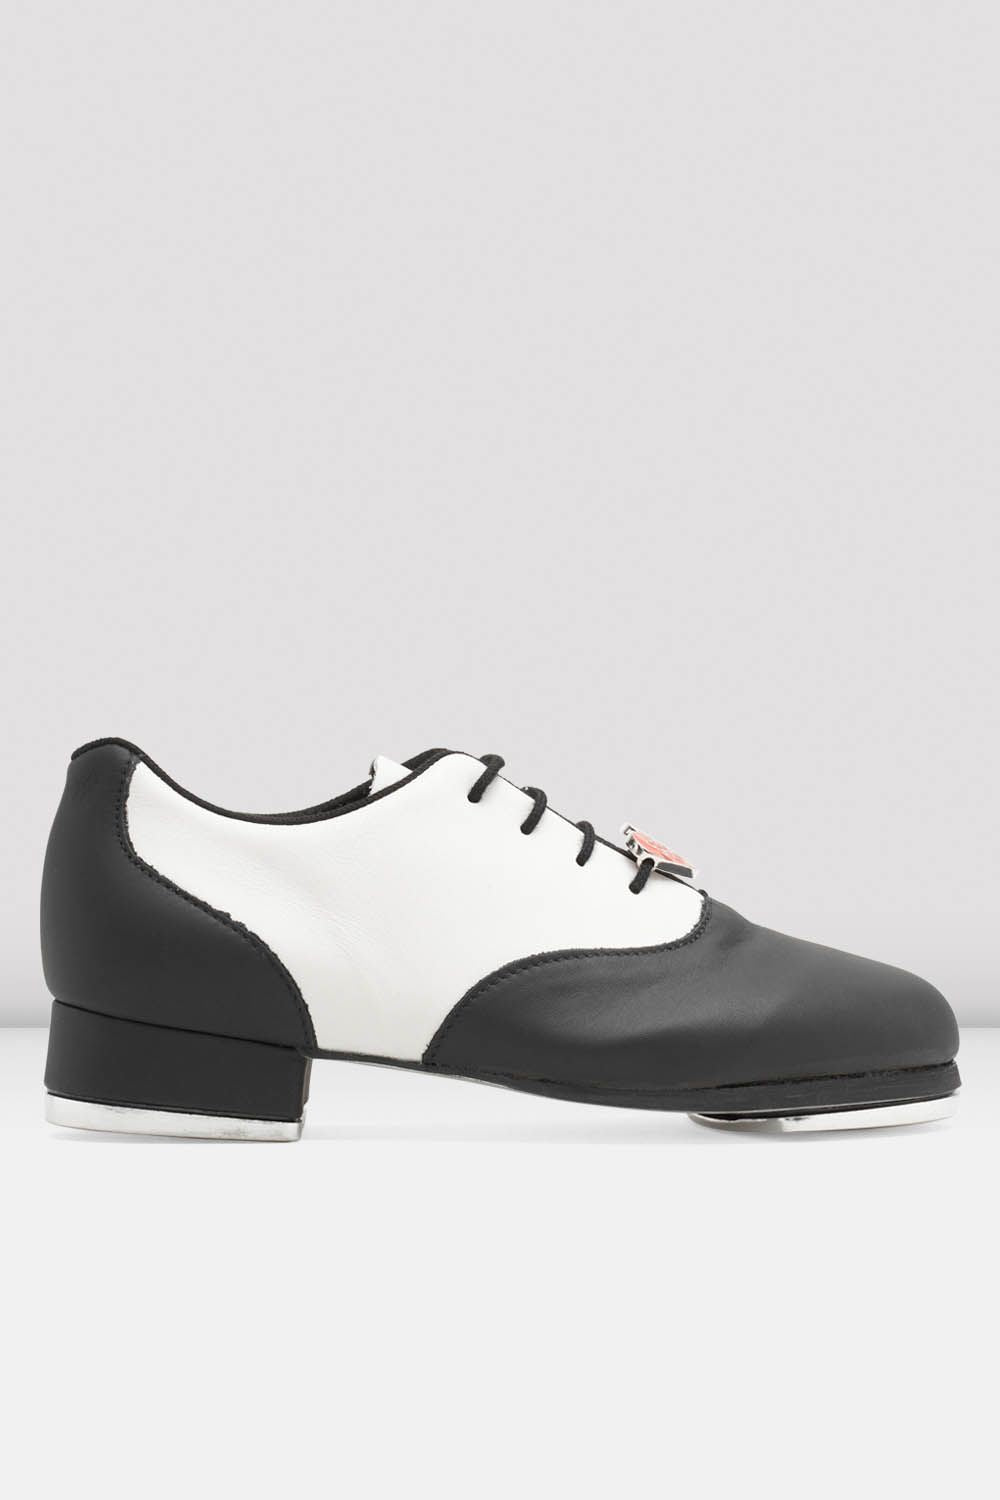 BLOCH Ladies Chloe And Maud Tap Shoes, Black White Leather